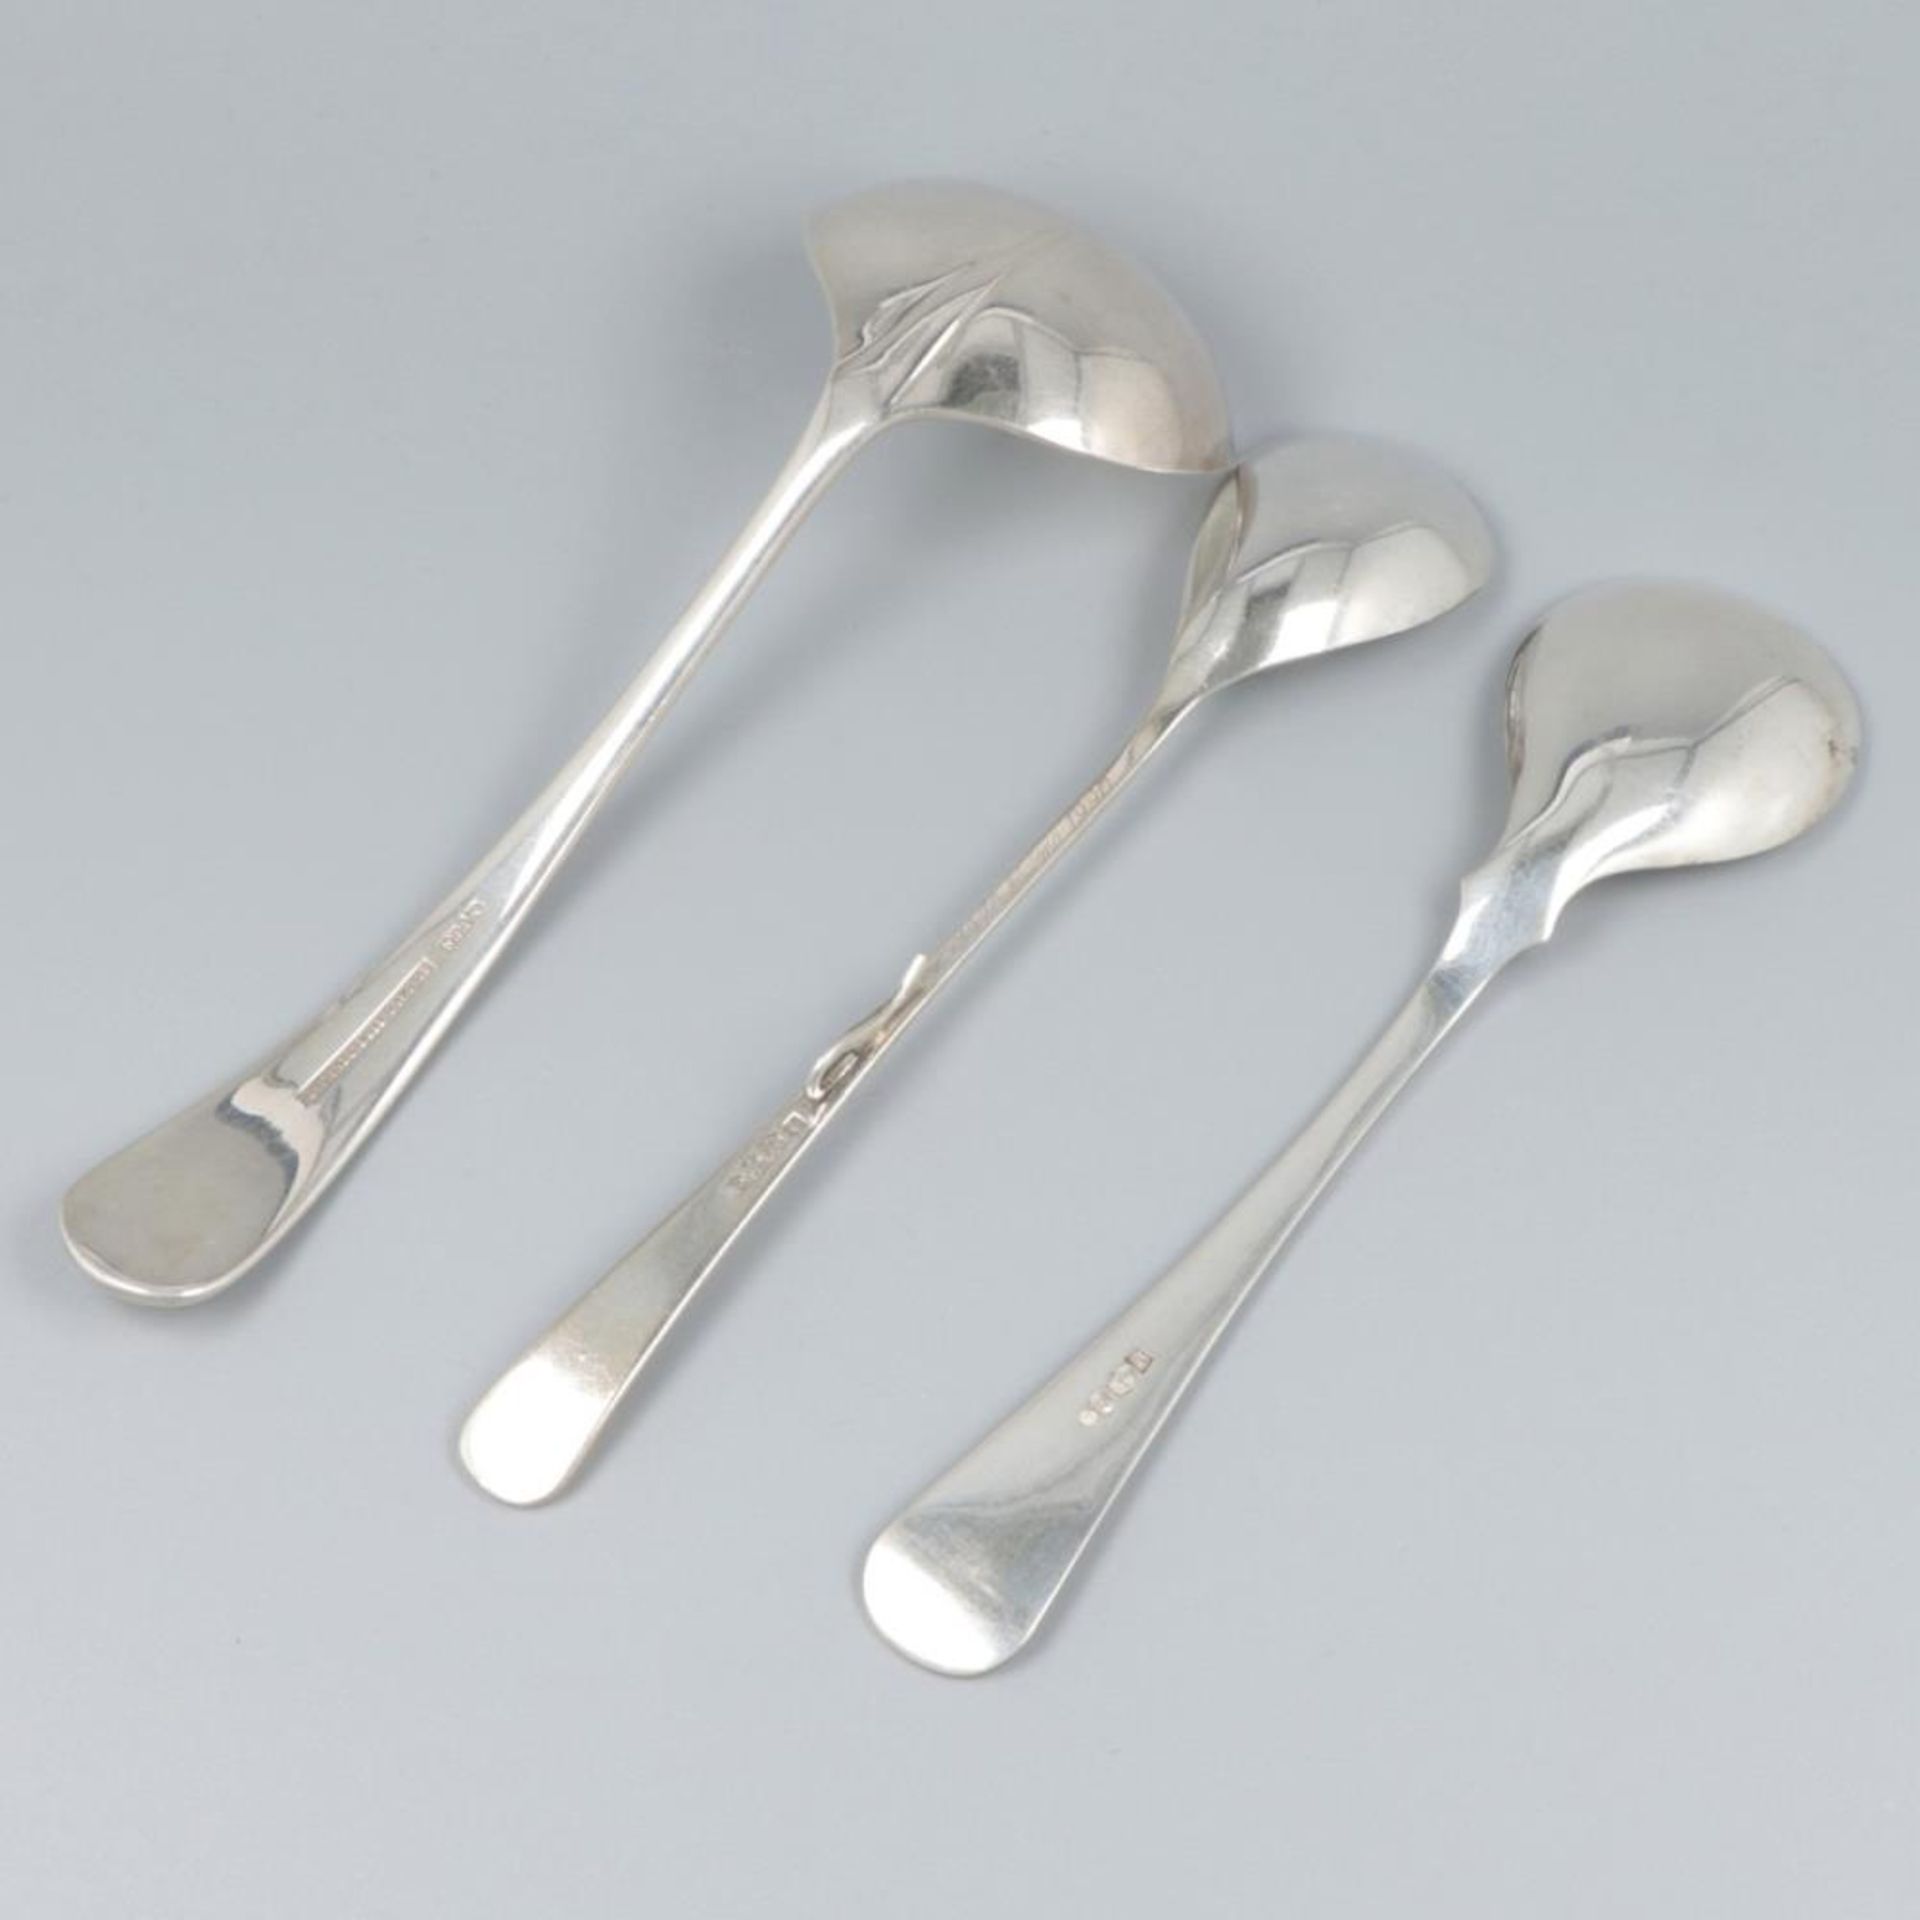 3-piece lot "Haags Lofje" silver / silver-plated spoons. - Bild 2 aus 5